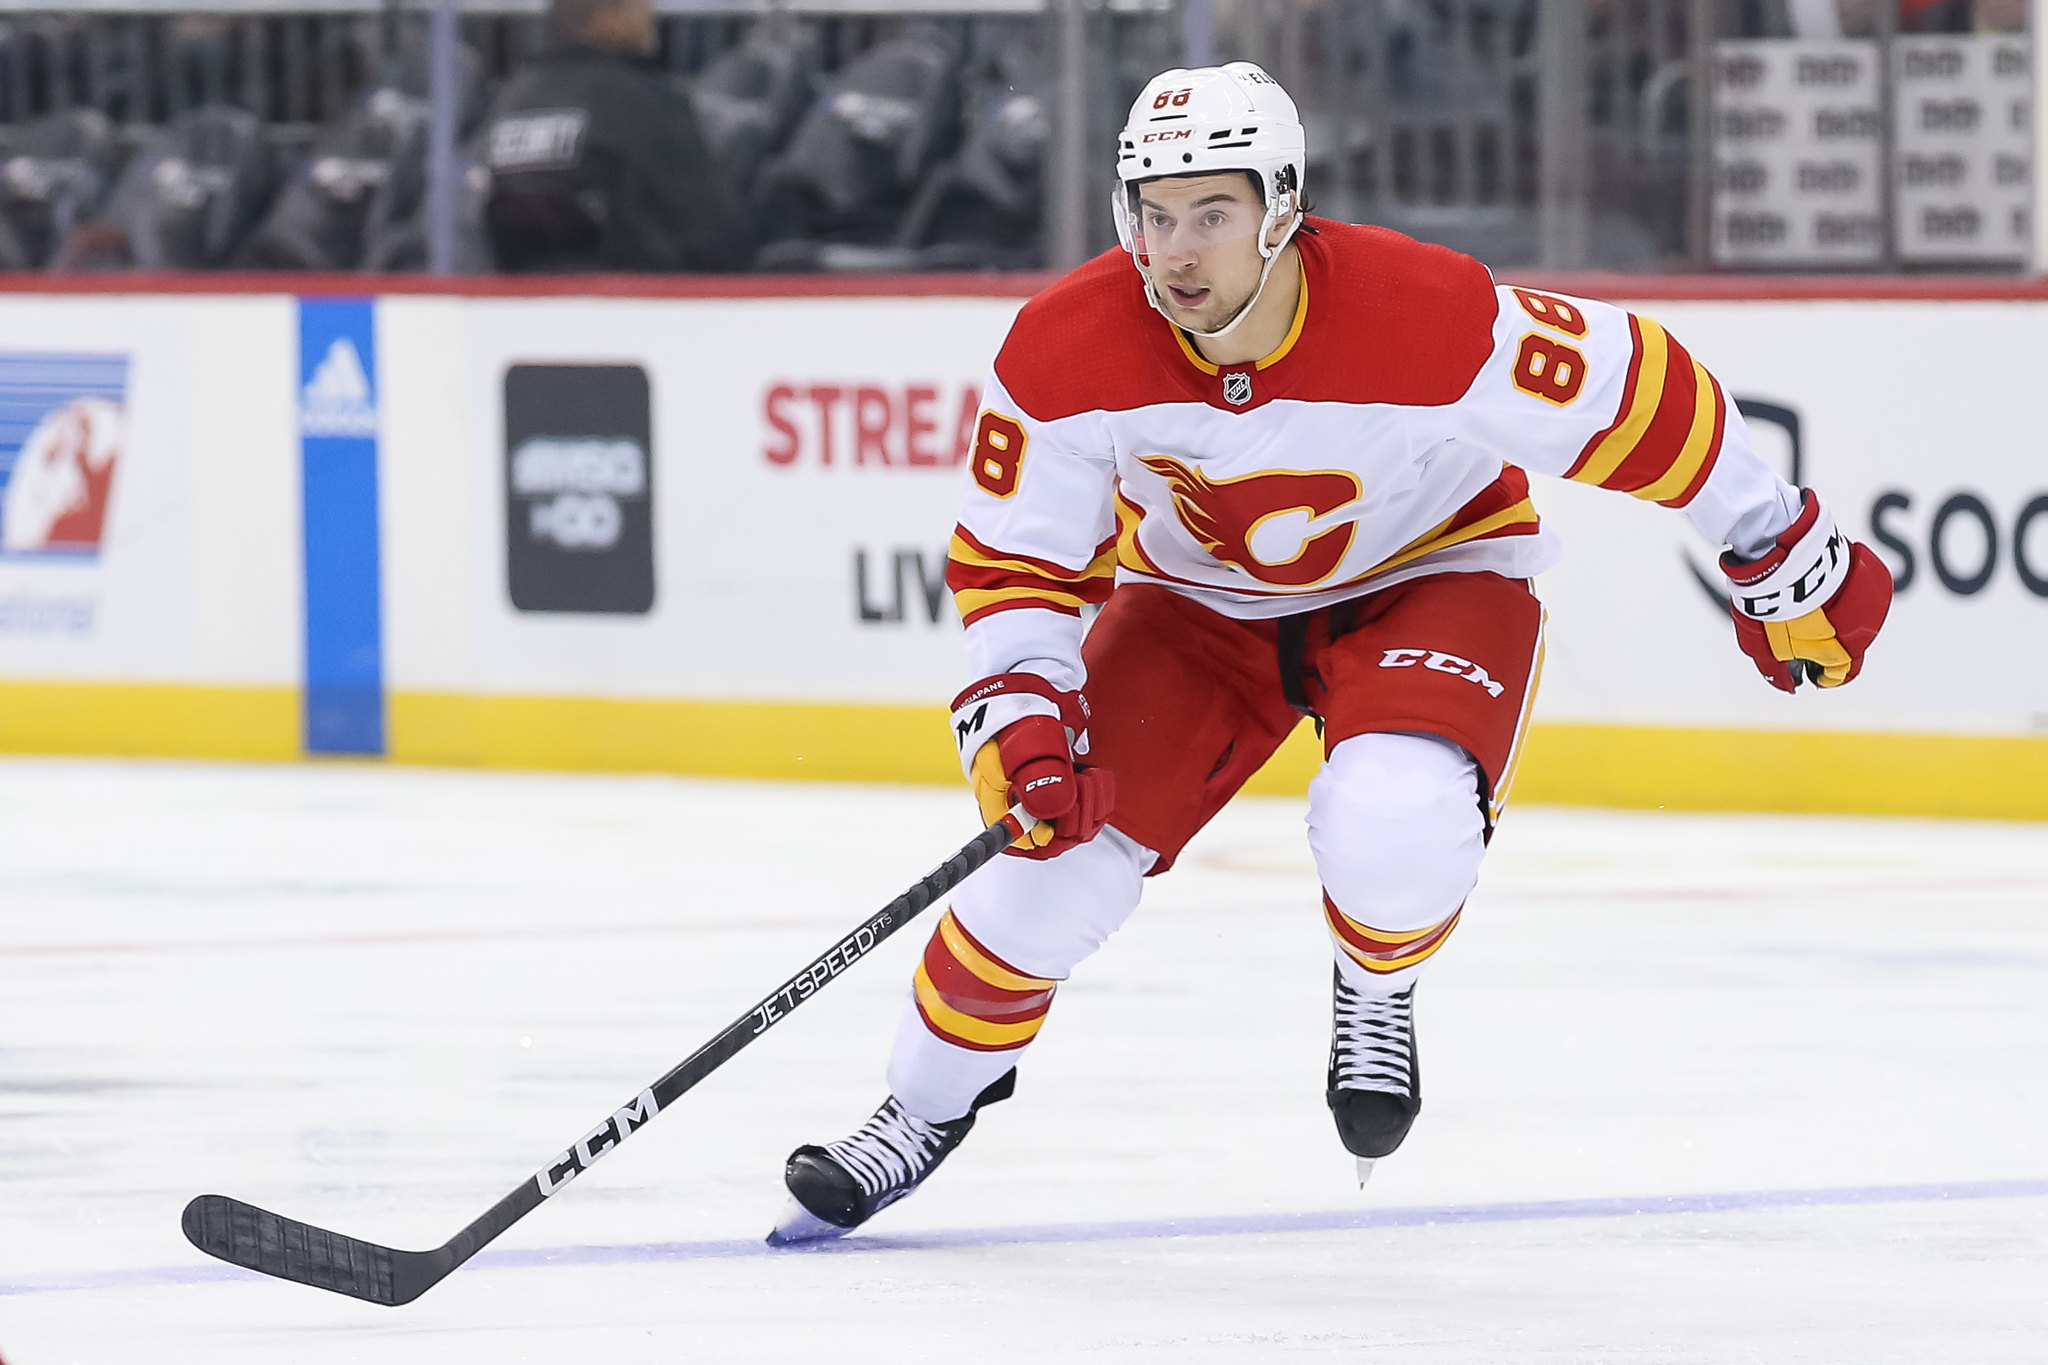 Flames' Mangiapane '100% fully healthy' after shoulder surgery